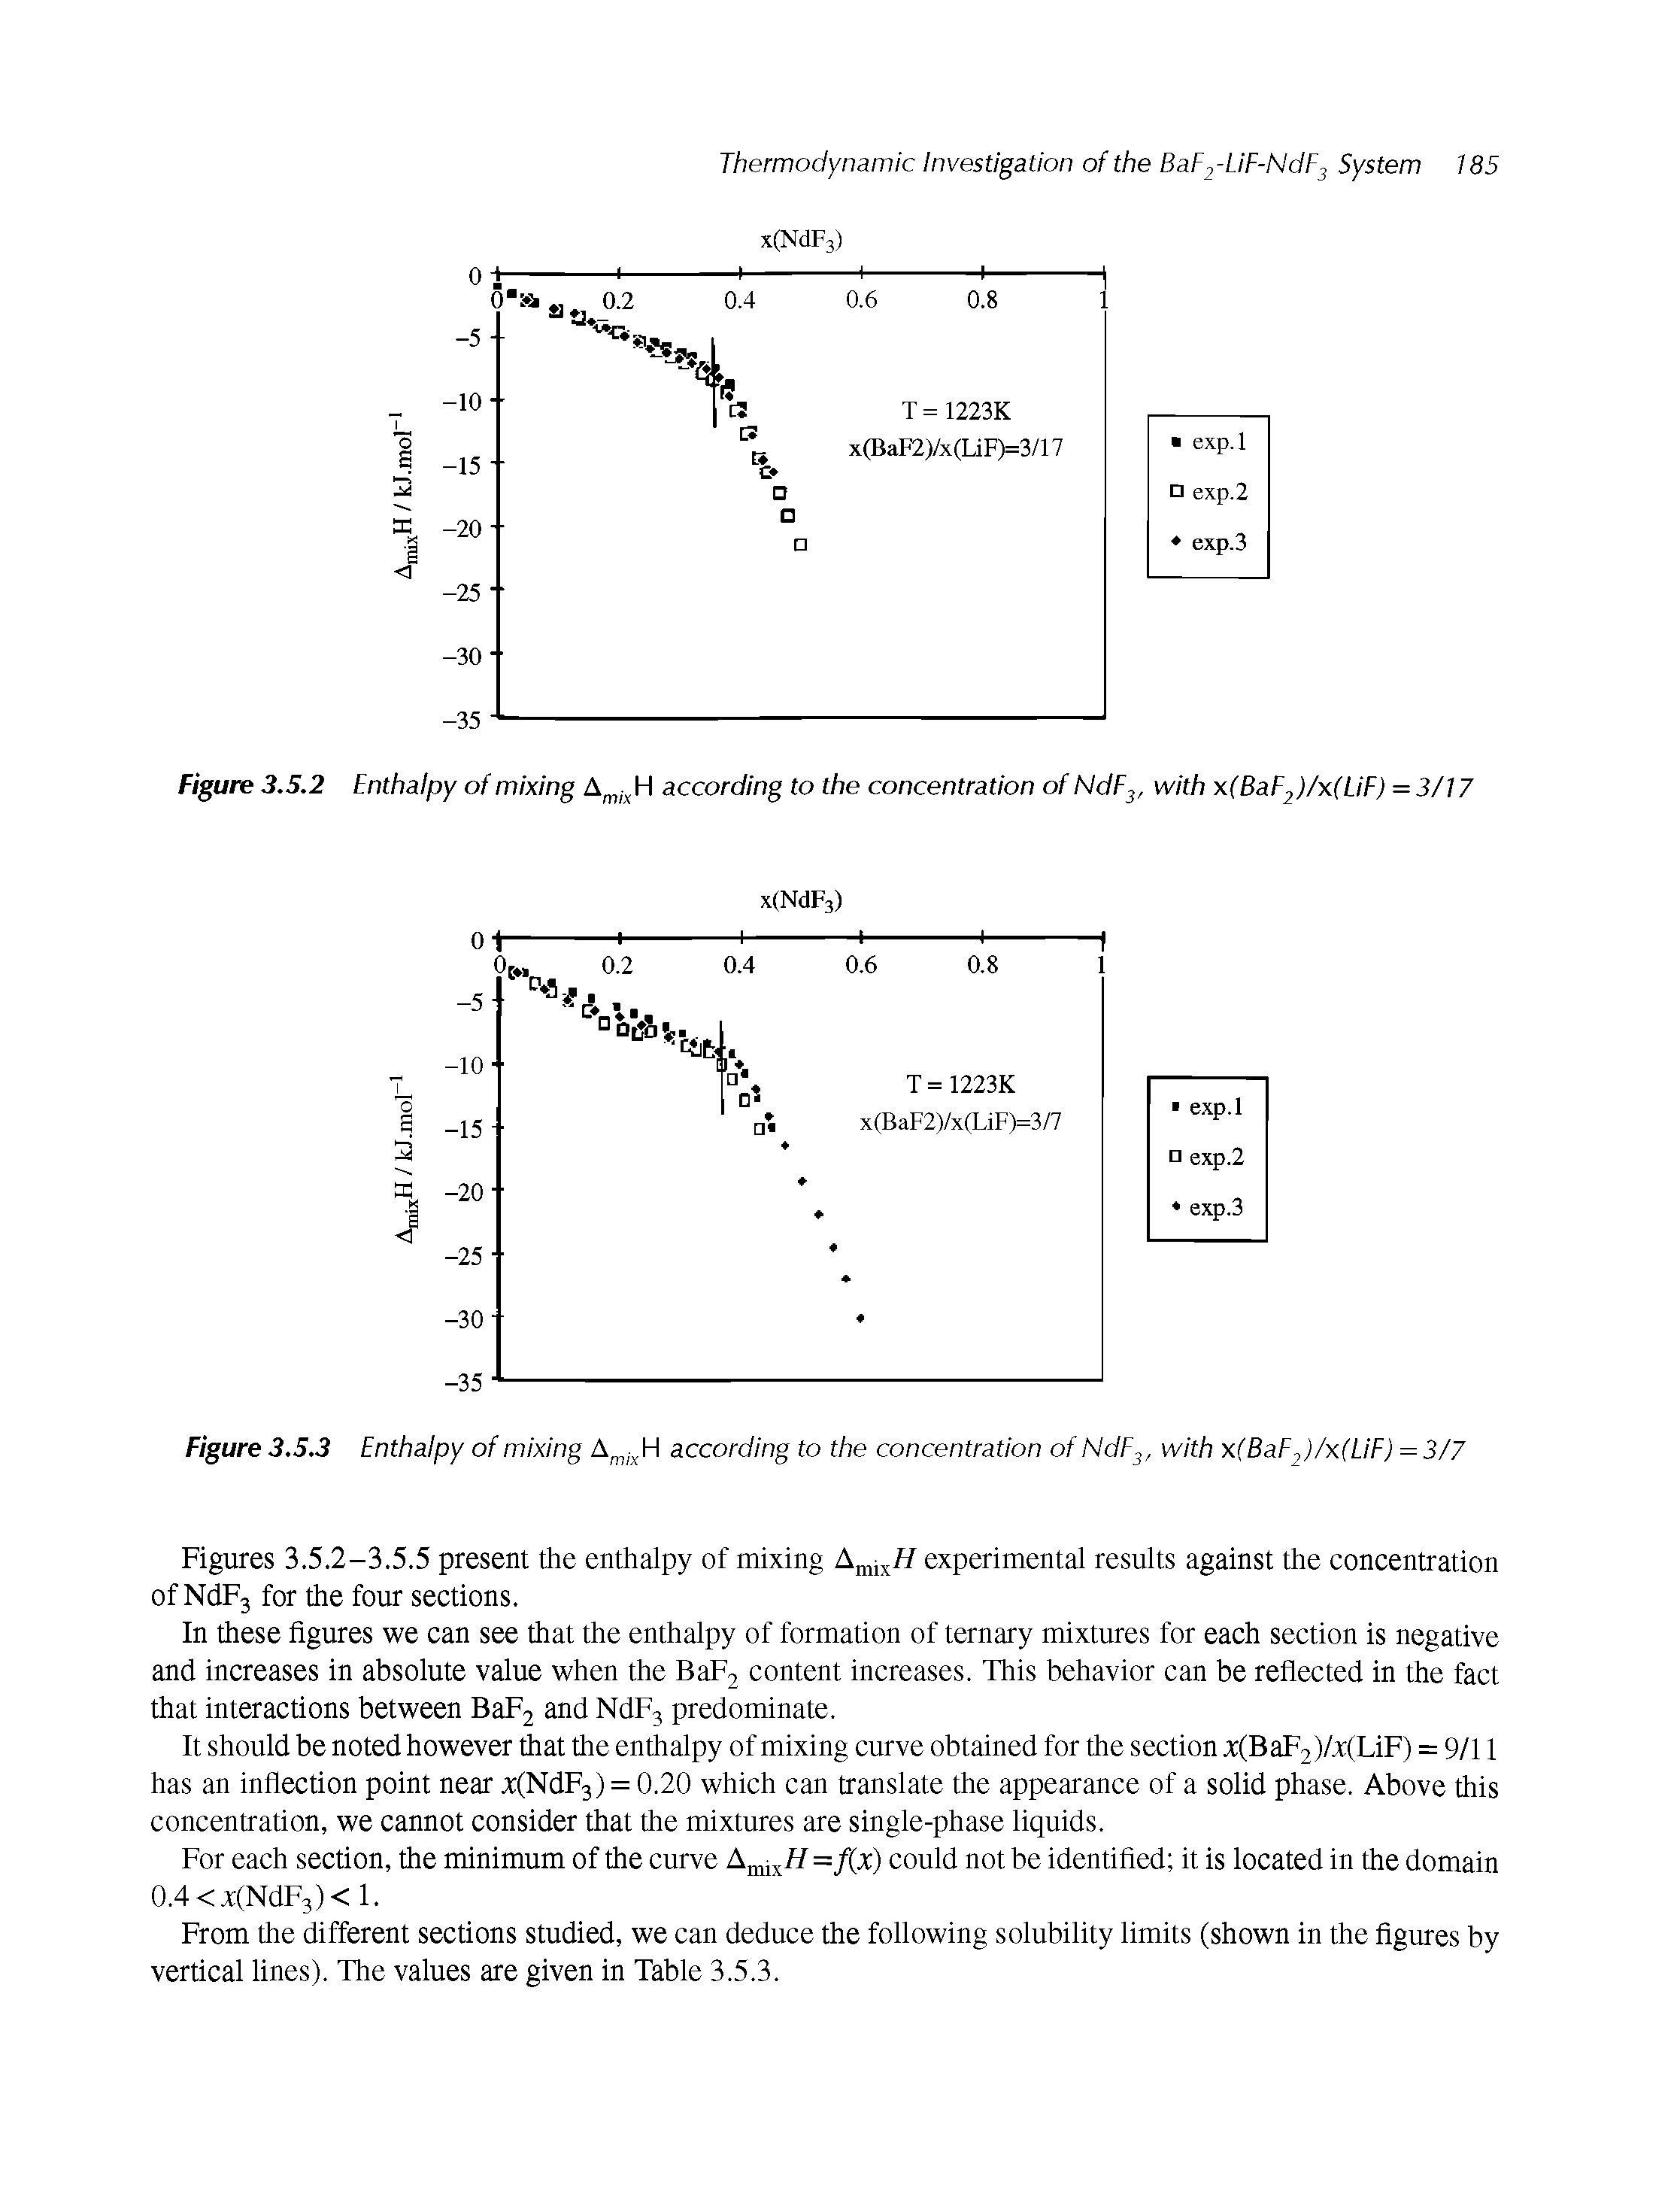 Figures 3.5.2-3.5.S present the enthalpy of mixing experimental results against the concentration of NdFj for the four sections.